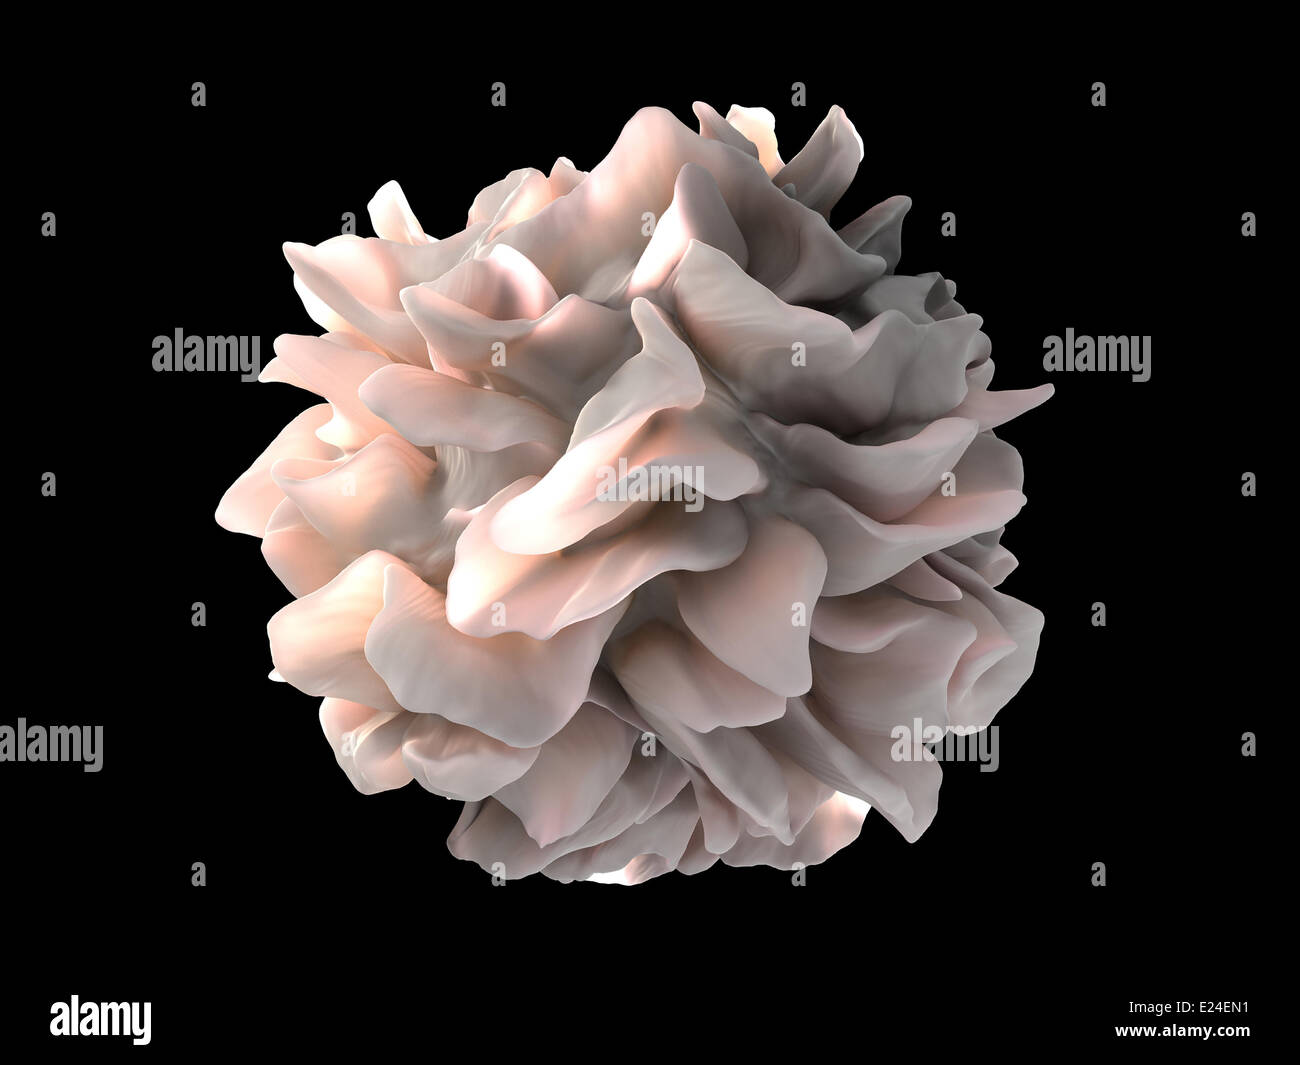 Dendritic cell revealed Stock Photo